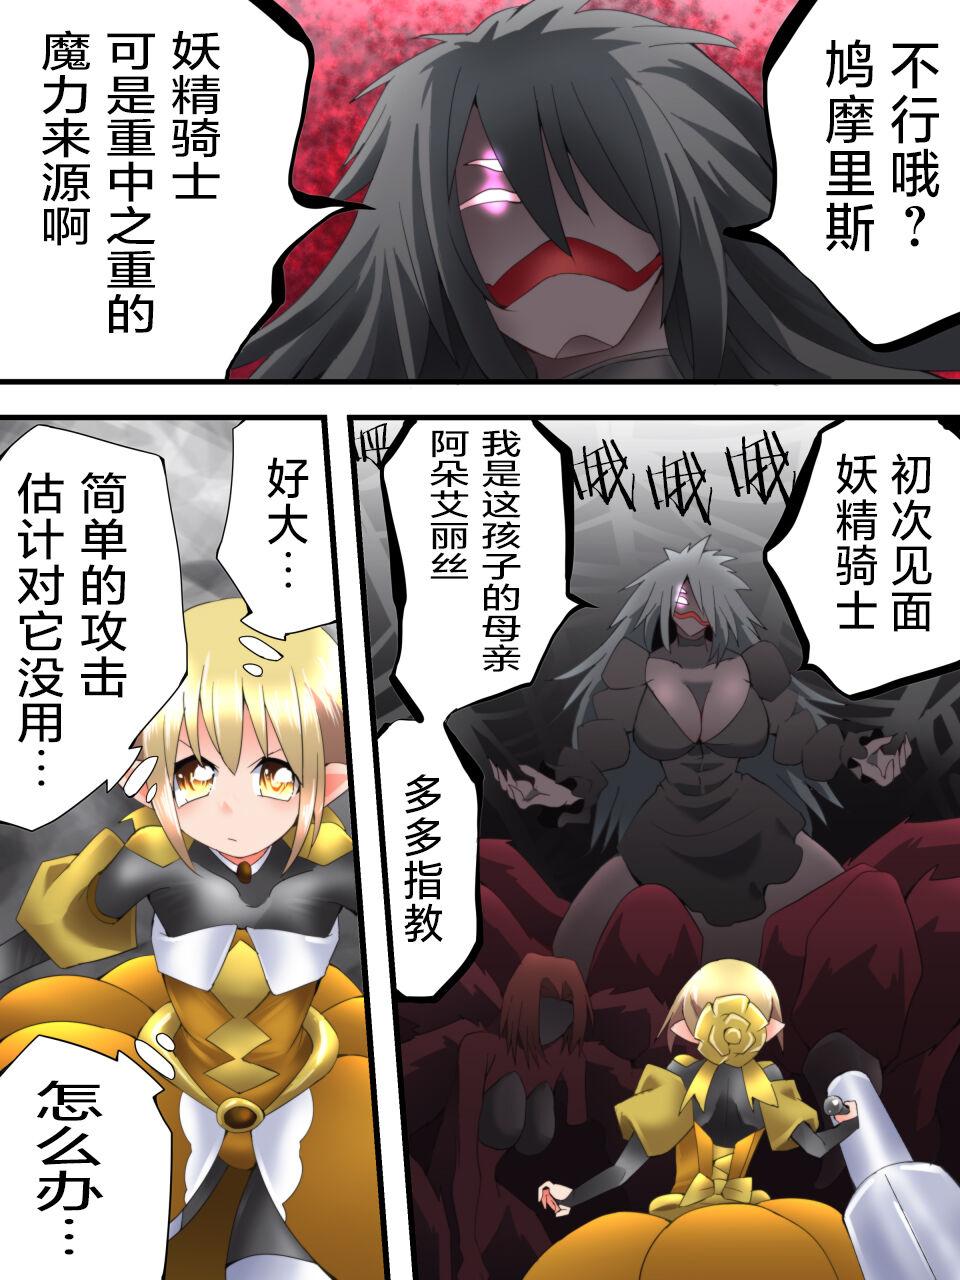 Fairy Knight Fairy Bloom Ep5 Chinese Ver. 24